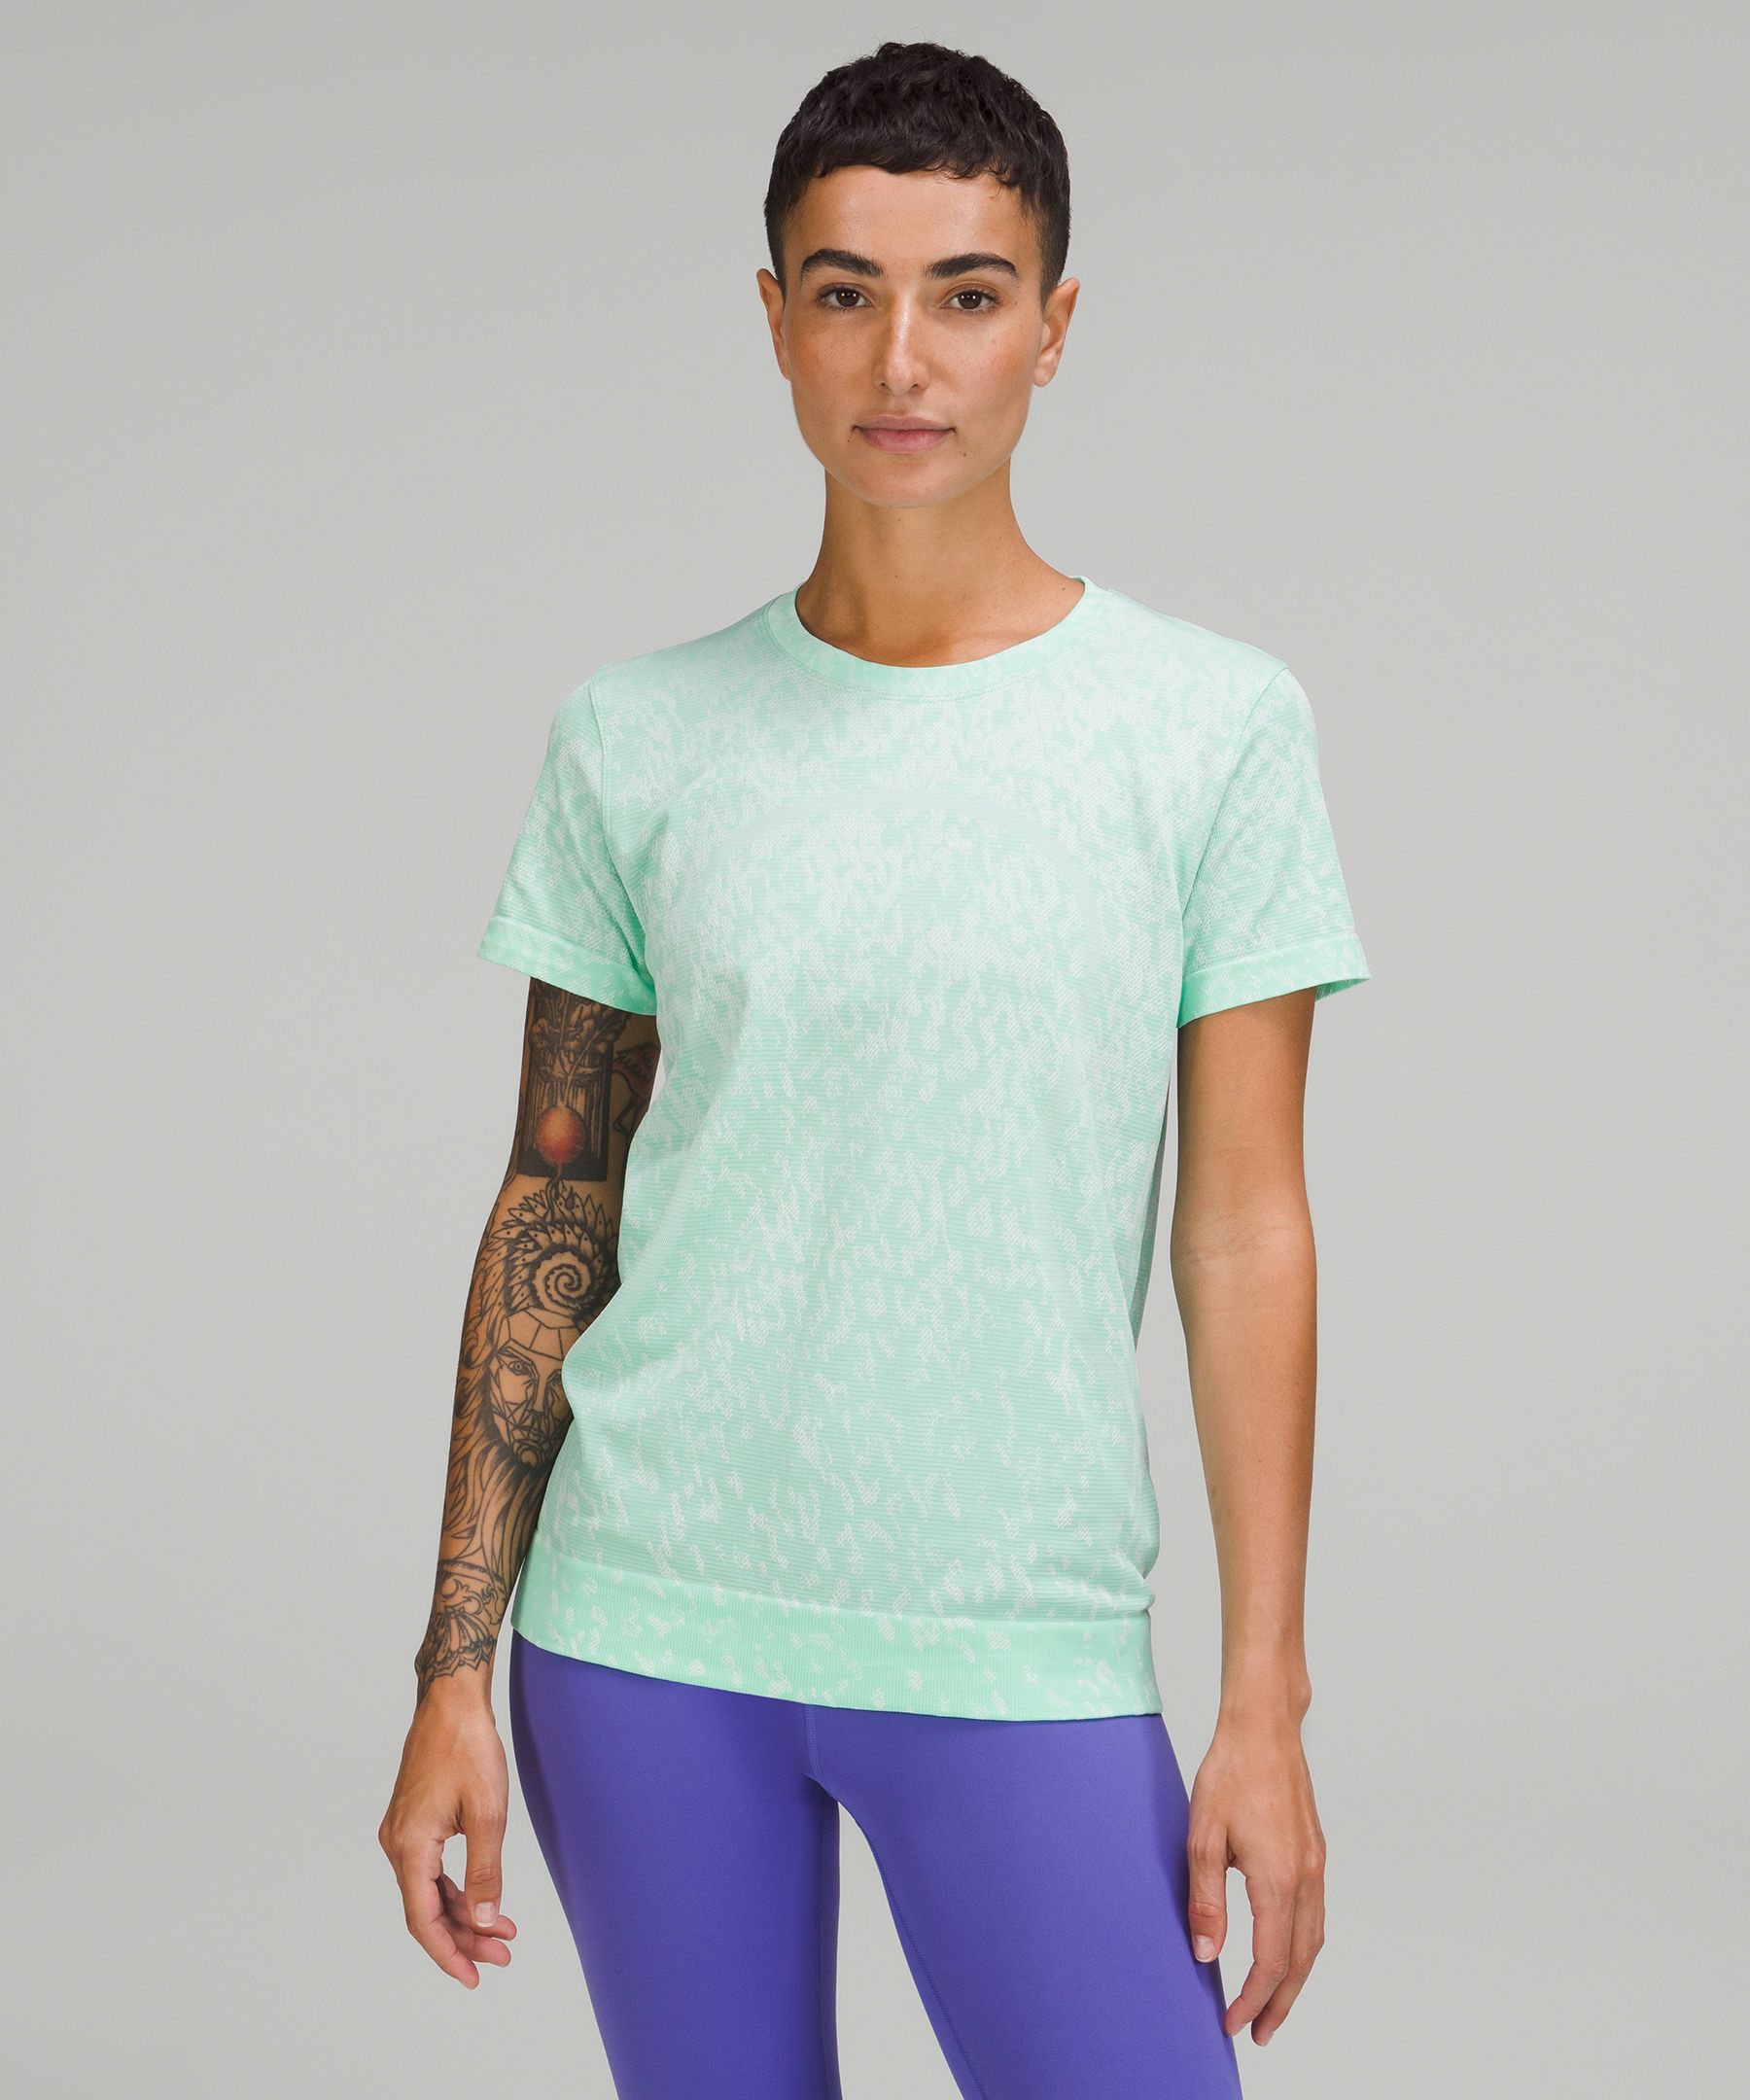 Lululemon Swiftly Relaxed-fit Short Sleeve T-shirt In Covered Camo Wild Mint/white